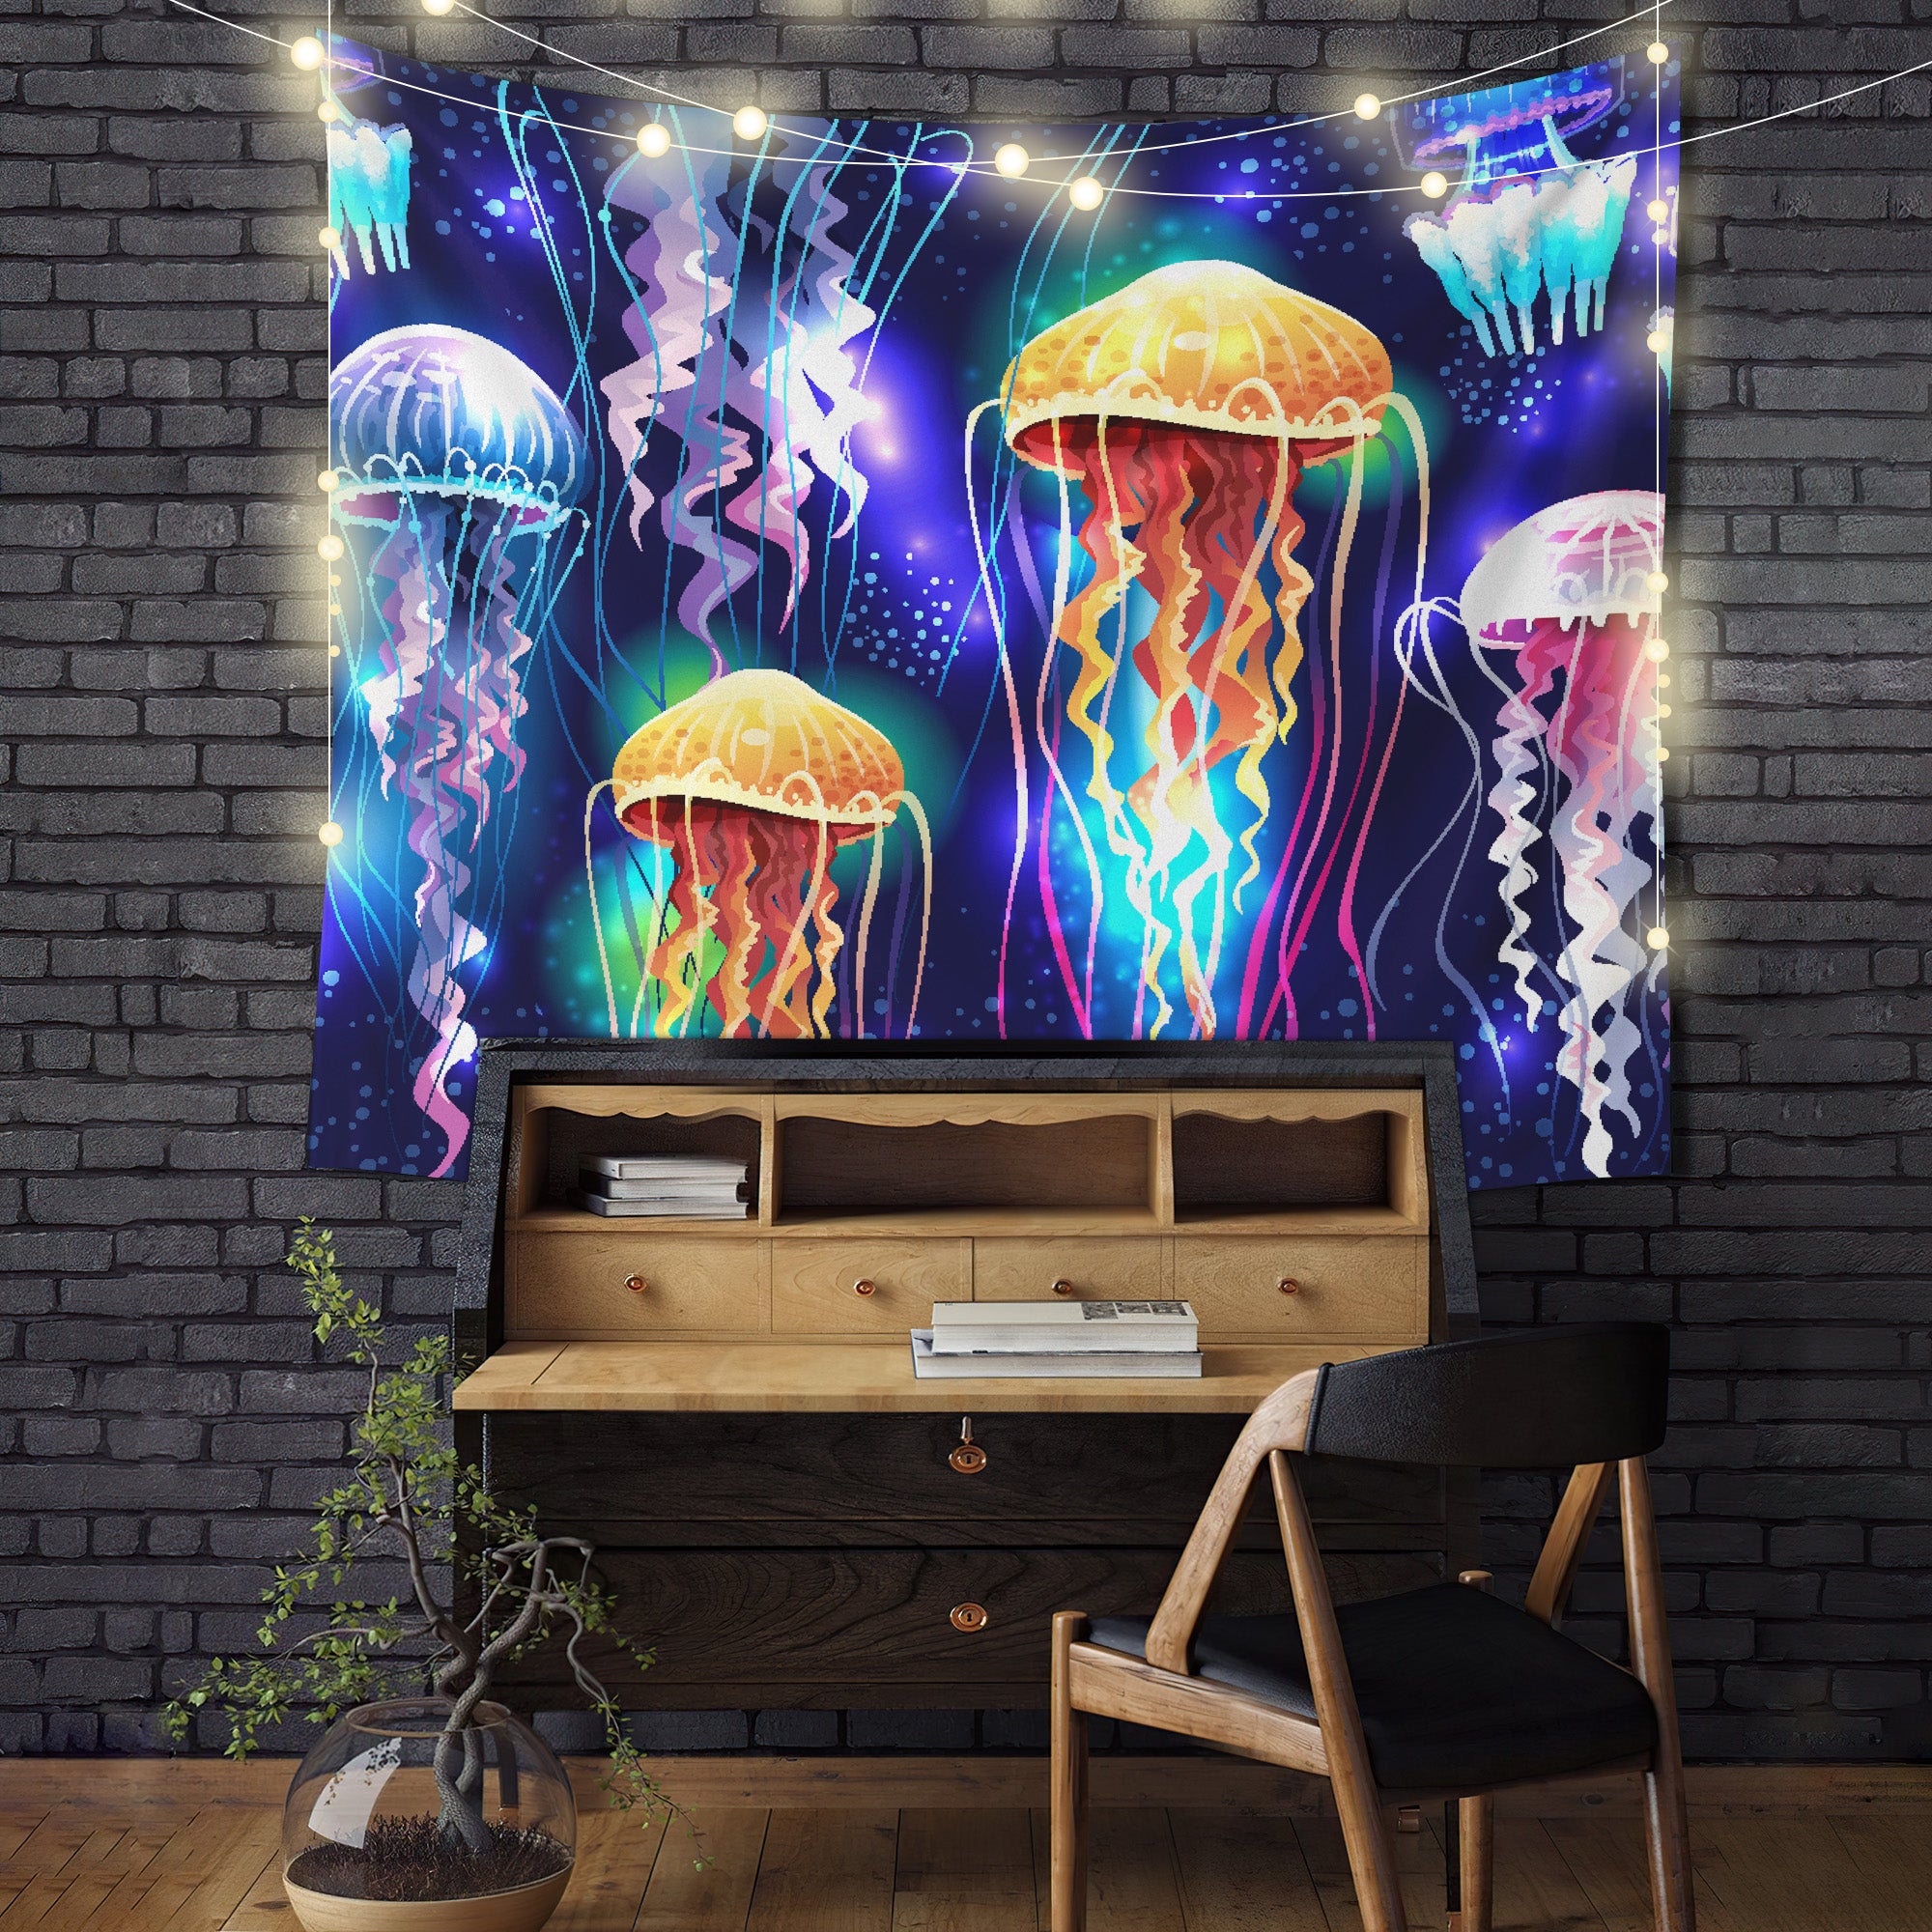 Jellyfishes Glowing Underwater Tapestry Room Decor